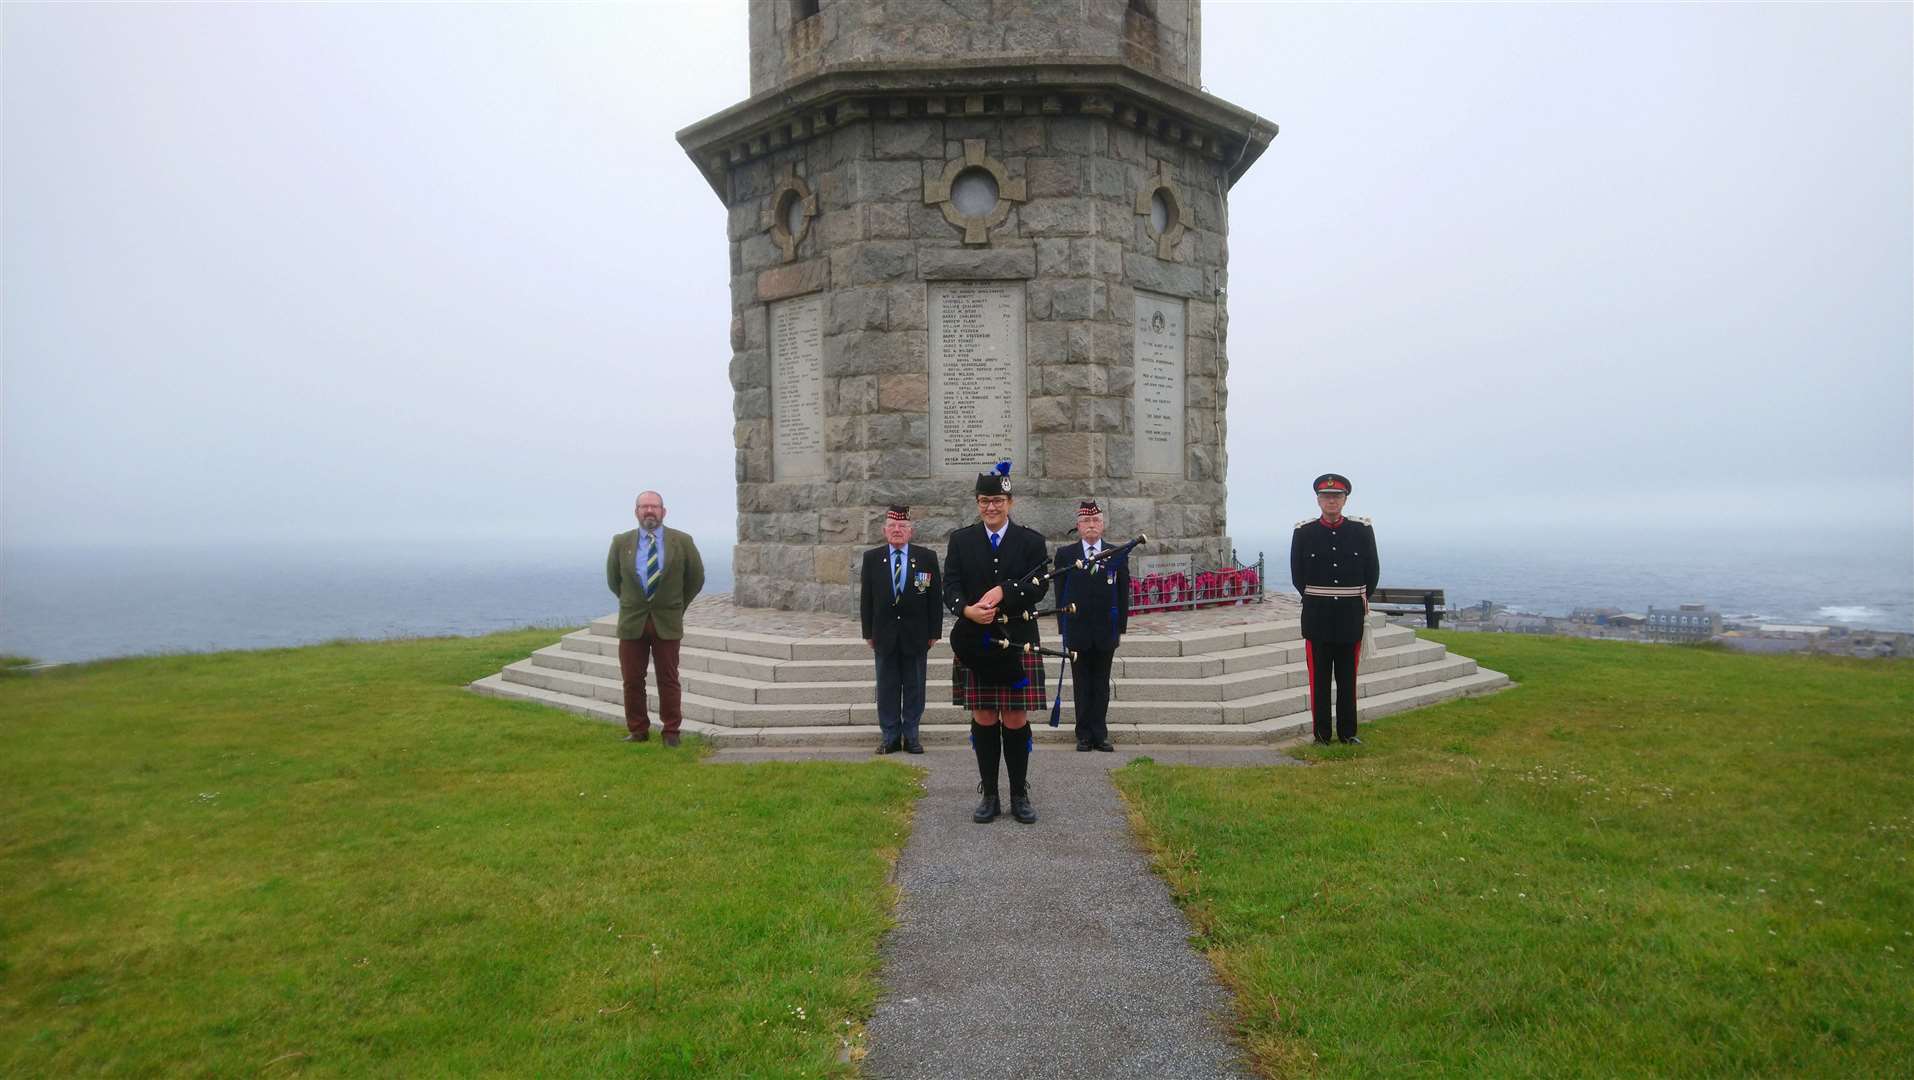 A commemorative ceremony was held at Macduff war memorial to mark the 80th anniversary of the battle.